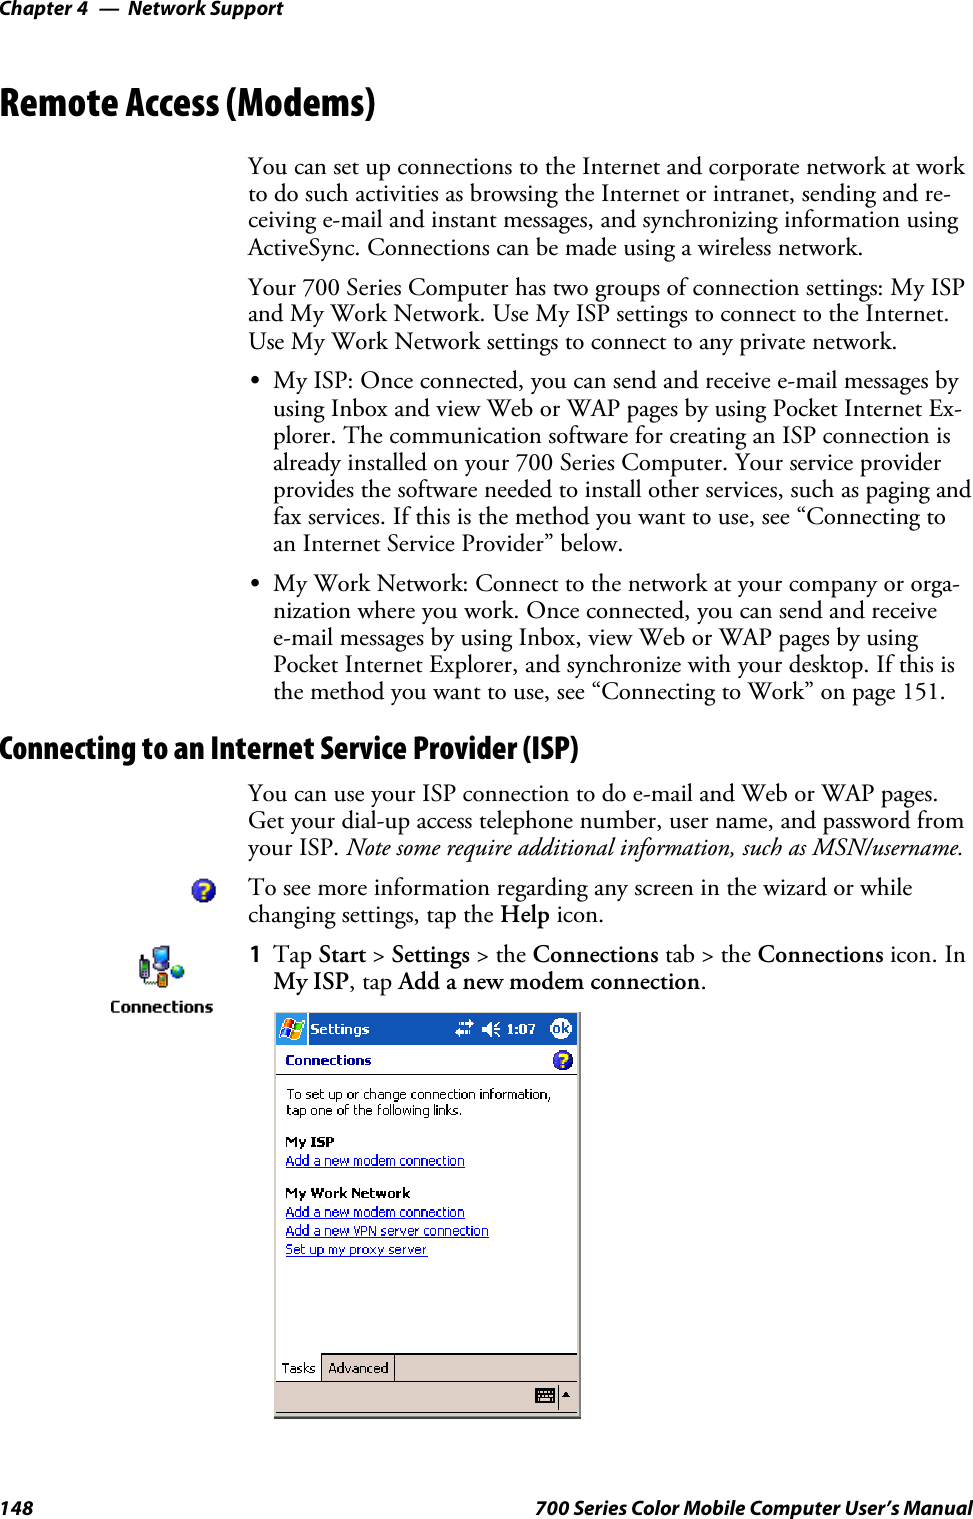 Network SupportChapter —4148 700 Series Color Mobile Computer User’s ManualRemote Access (Modems)You can set up connections to the Internet and corporate network at workto do such activities as browsing the Internet or intranet, sending and re-ceiving e-mail and instant messages, and synchronizing information usingActiveSync. Connections can be made using a wireless network.Your 700 Series Computer has two groups of connection settings: My ISPand My Work Network. Use My ISP settings to connect to the Internet.Use My Work Network settings to connect to any private network.SMy ISP: Once connected, you can send and receive e-mail messages byusing Inbox and view Web or WAP pages by using Pocket Internet Ex-plorer. The communication software for creating an ISP connection isalready installed on your 700 Series Computer. Your service providerprovides the software needed to install other services, such as paging andfax services. If this is the method you want to use, see “Connecting toan Internet Service Provider” below.SMy Work Network: Connect to the network at your company or orga-nization where you work. Once connected, you can send and receivee-mail messages by using Inbox, view Web or WAP pages by usingPocket Internet Explorer, and synchronize with your desktop. If this isthe method you want to use, see “Connecting to Work” on page 151.Connecting to an Internet Service Provider (ISP)You can use your ISP connection to do e-mail and Web or WAP pages.Get your dial-up access telephone number, user name, and password fromyour ISP. Note some require additional information, such as MSN/username.To see more information regarding any screen in the wizard or whilechanging settings, tap the Help icon.1Tap Start &gt;Settings &gt;theConnections tab&gt;theConnections icon. InMy ISP,tapAdd a new modem connection.